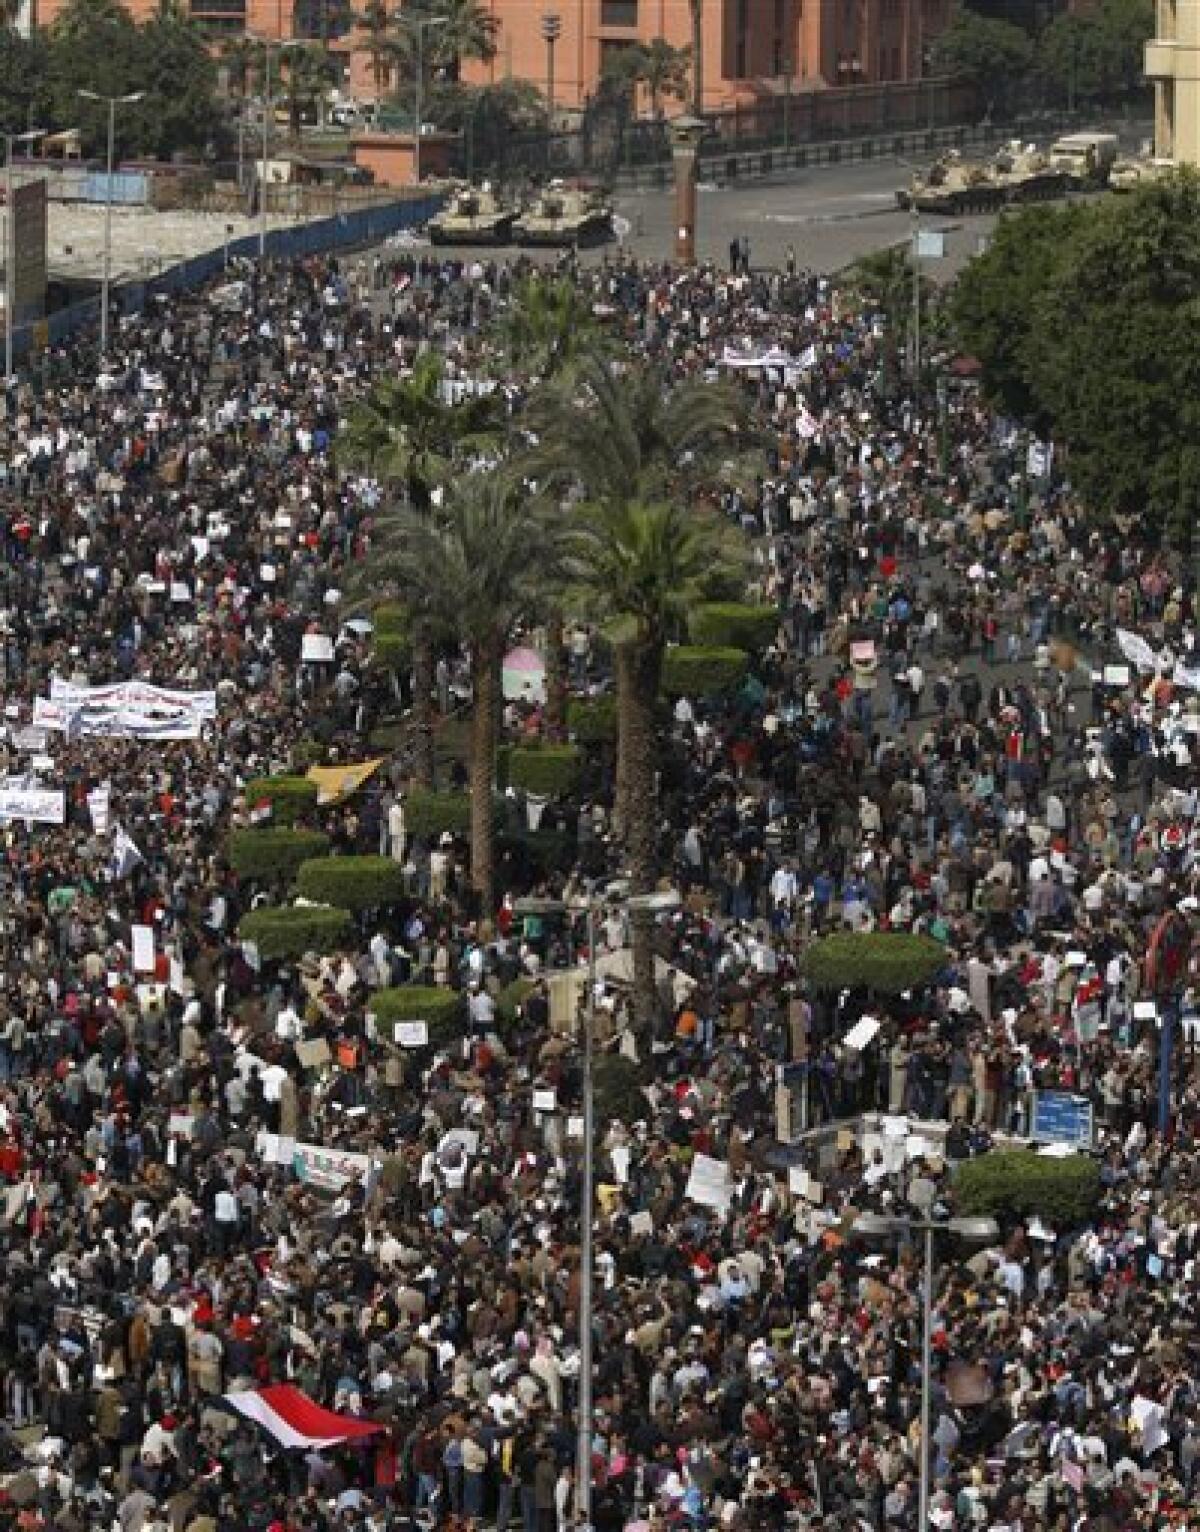 The crowd gathers in Tahrir, or Liberation, Square in Cairo, Egypt, Tuesday, Feb. 1, 2011. Tens of thousands of people flooded into the heart of Cairo Tuesday, filling the city's main square as a call for a million protesters was answered by the largest demonstration in a week of unceasing demands for President Hosni Mubarak to leave after nearly 30 years in power. (AP Photo/Khalil Hamra)